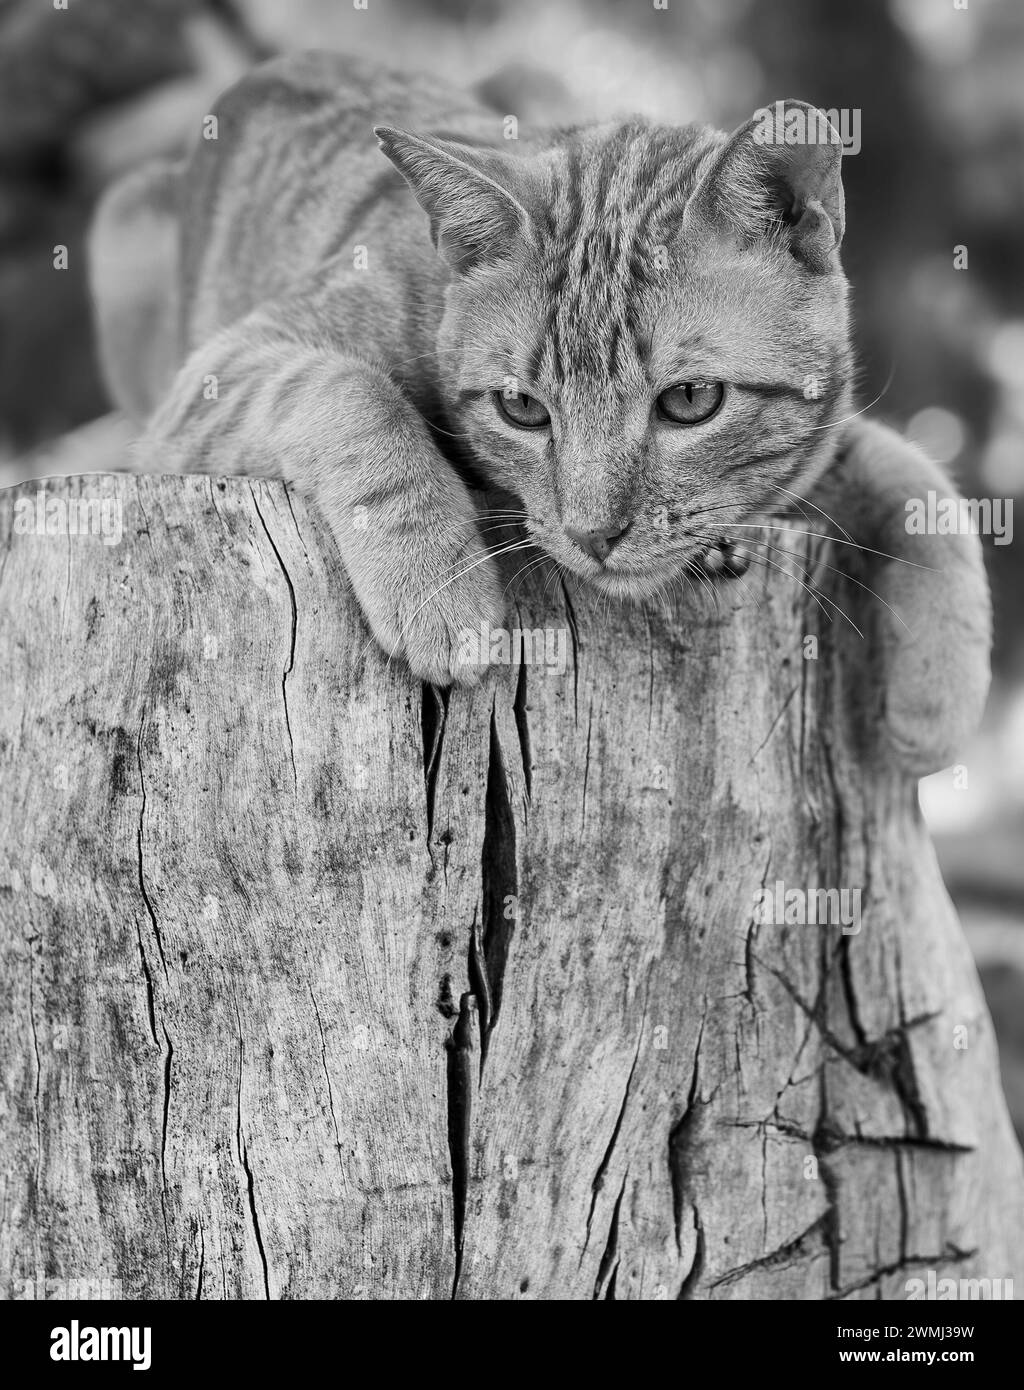 Black & white image of a tabby cat on a wooden log Stock Photo